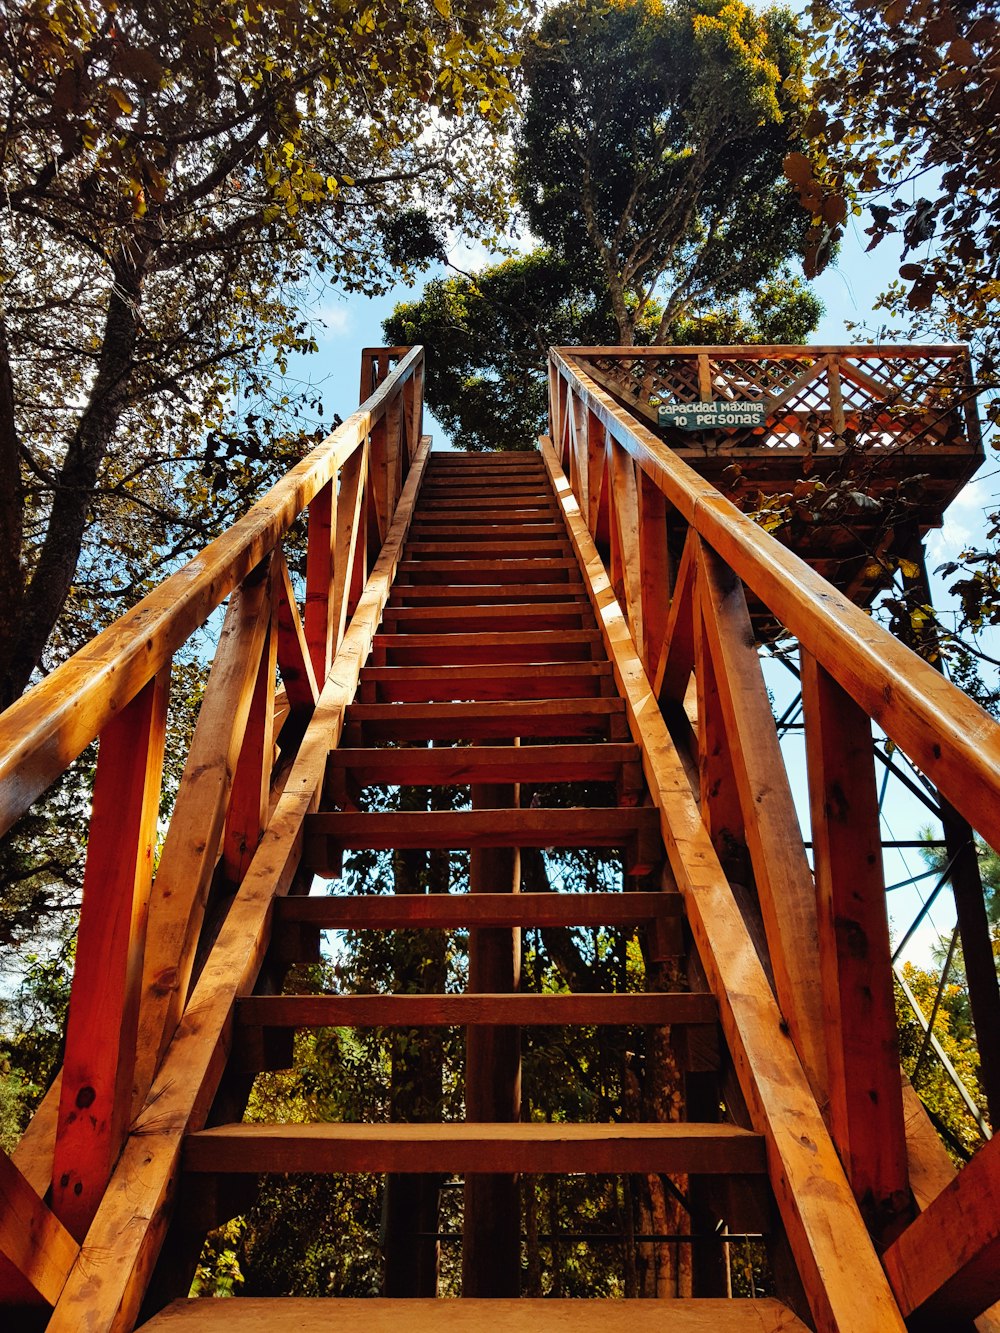 a wooden staircase going up into the sky